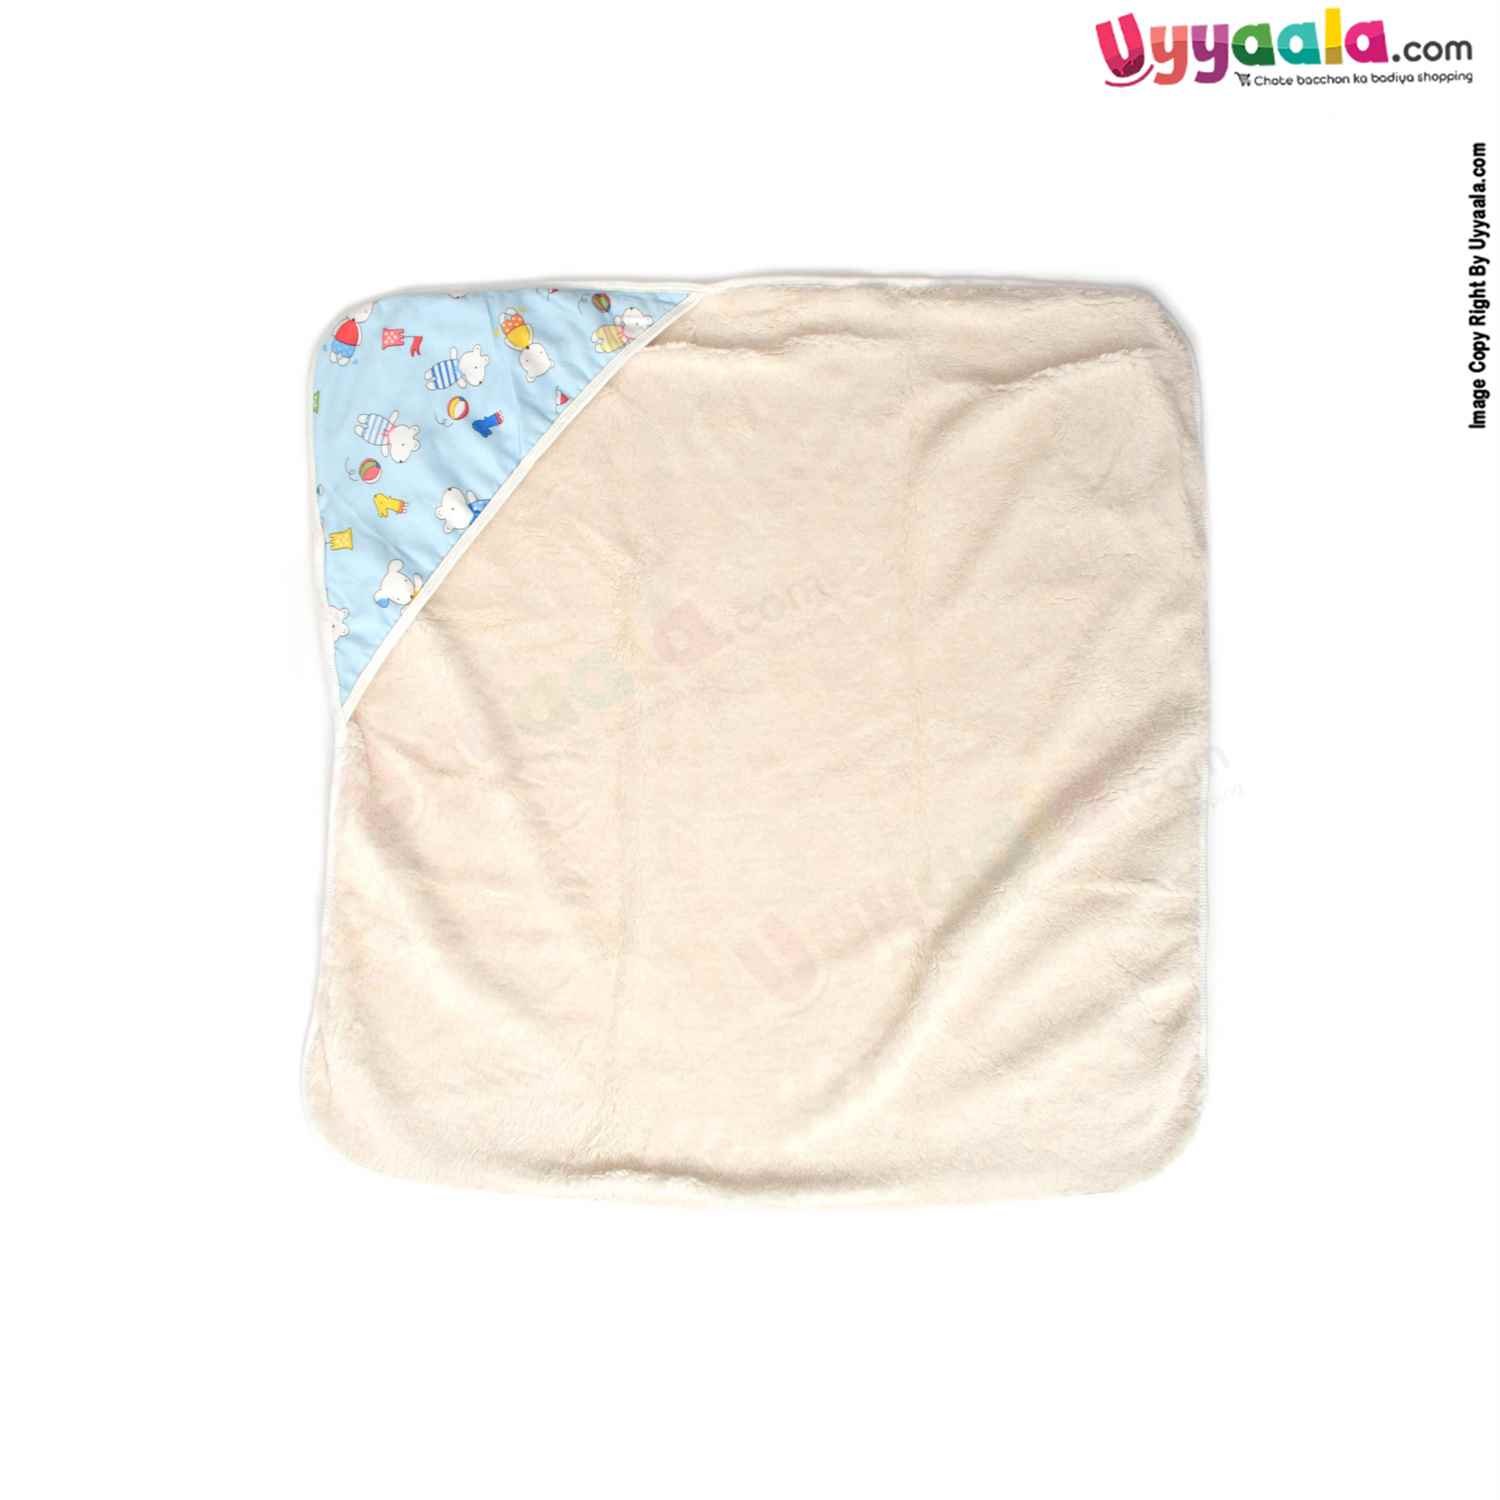 Double Layered (2 Ply) Hooded Blanket One Side Fur & Another Side Velvet with Animals Print for Babies 0-24m Age, Size(74*74cm)- Light Blue